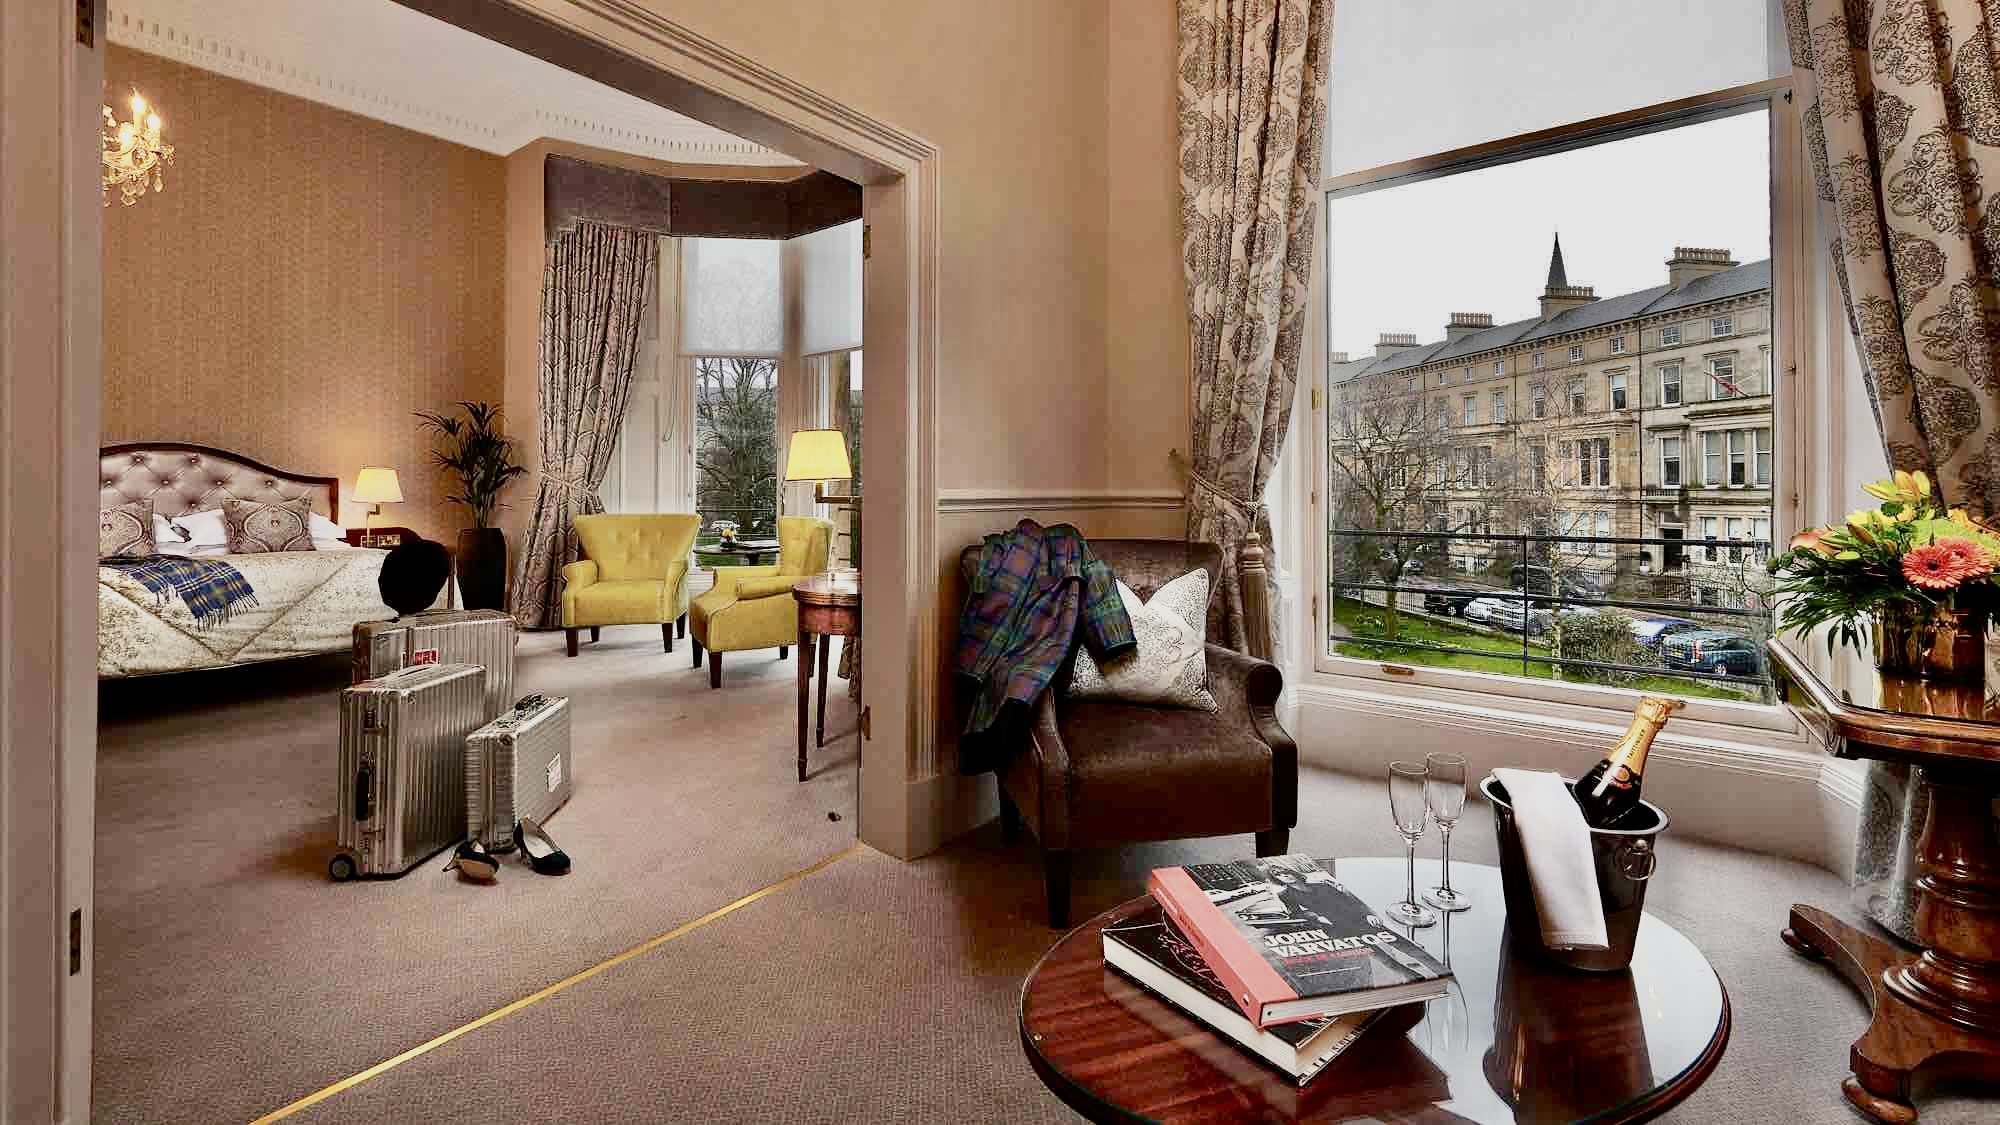 The Bonham Hotel with luxury rooms and luggae in one of the best boutique hotels in Edinburgh